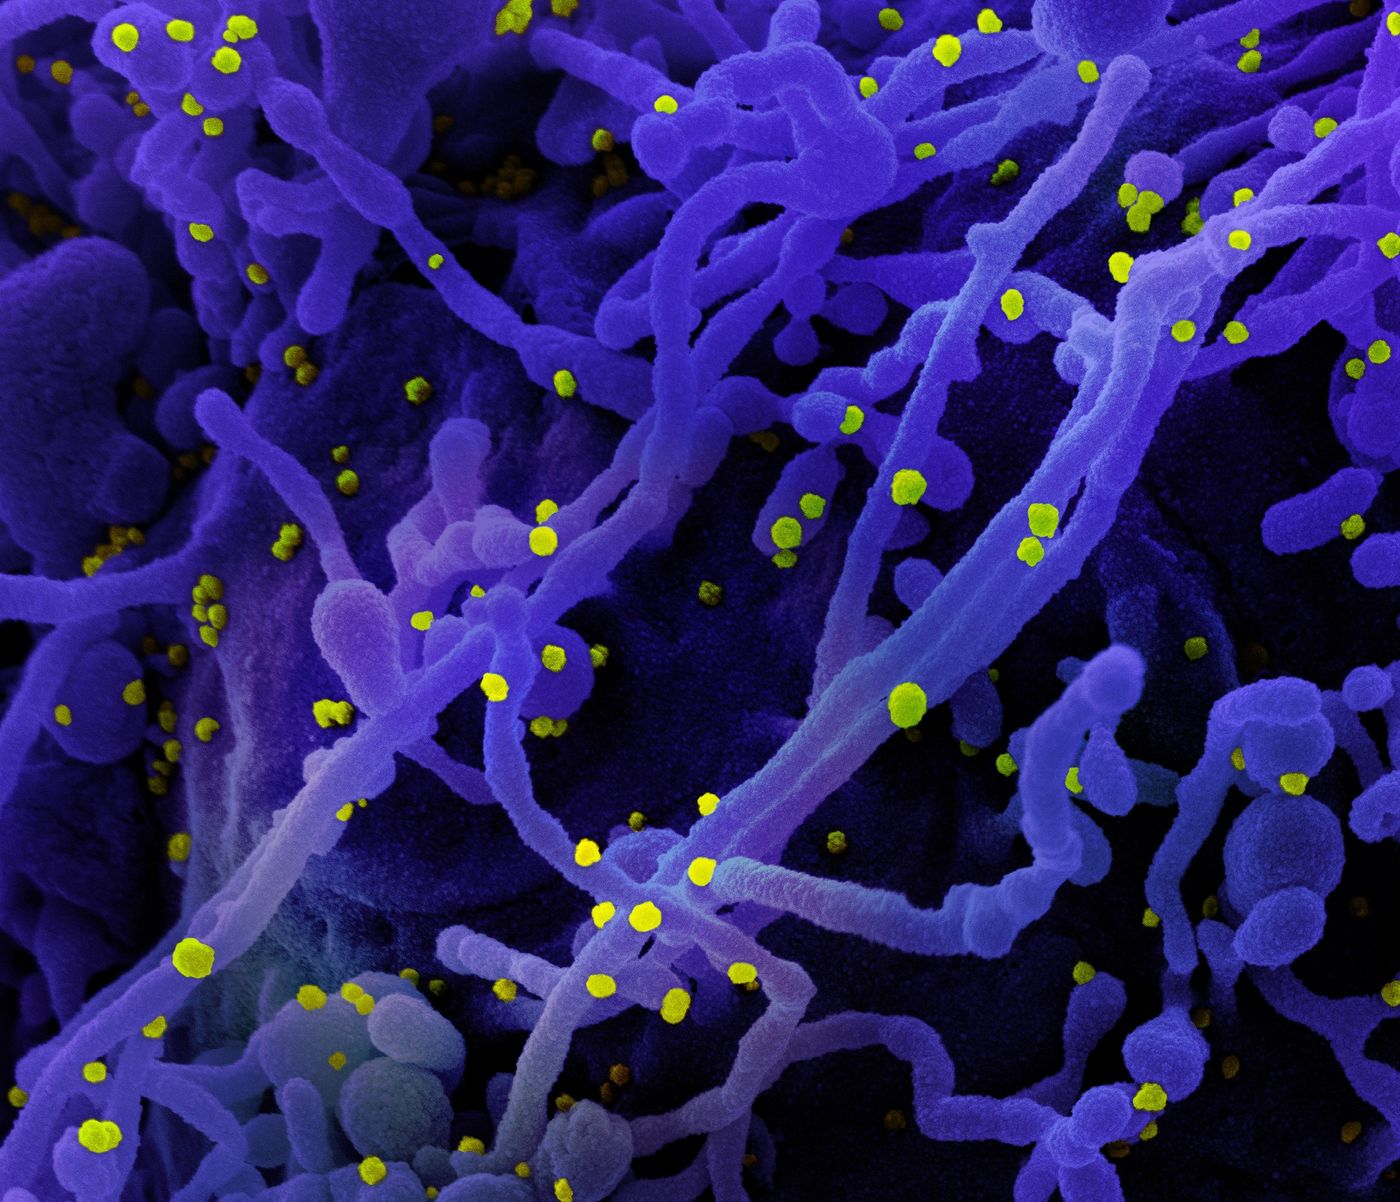 Colorized scanning electron micrograph of a cell (purple) infected with SARS-CoV-2 virus particles (yellow), isolated from a patient sample. Image captured at the NIAID Integrated Research Facility (IRF) in Fort Detrick, Maryland. Credit: NIAID